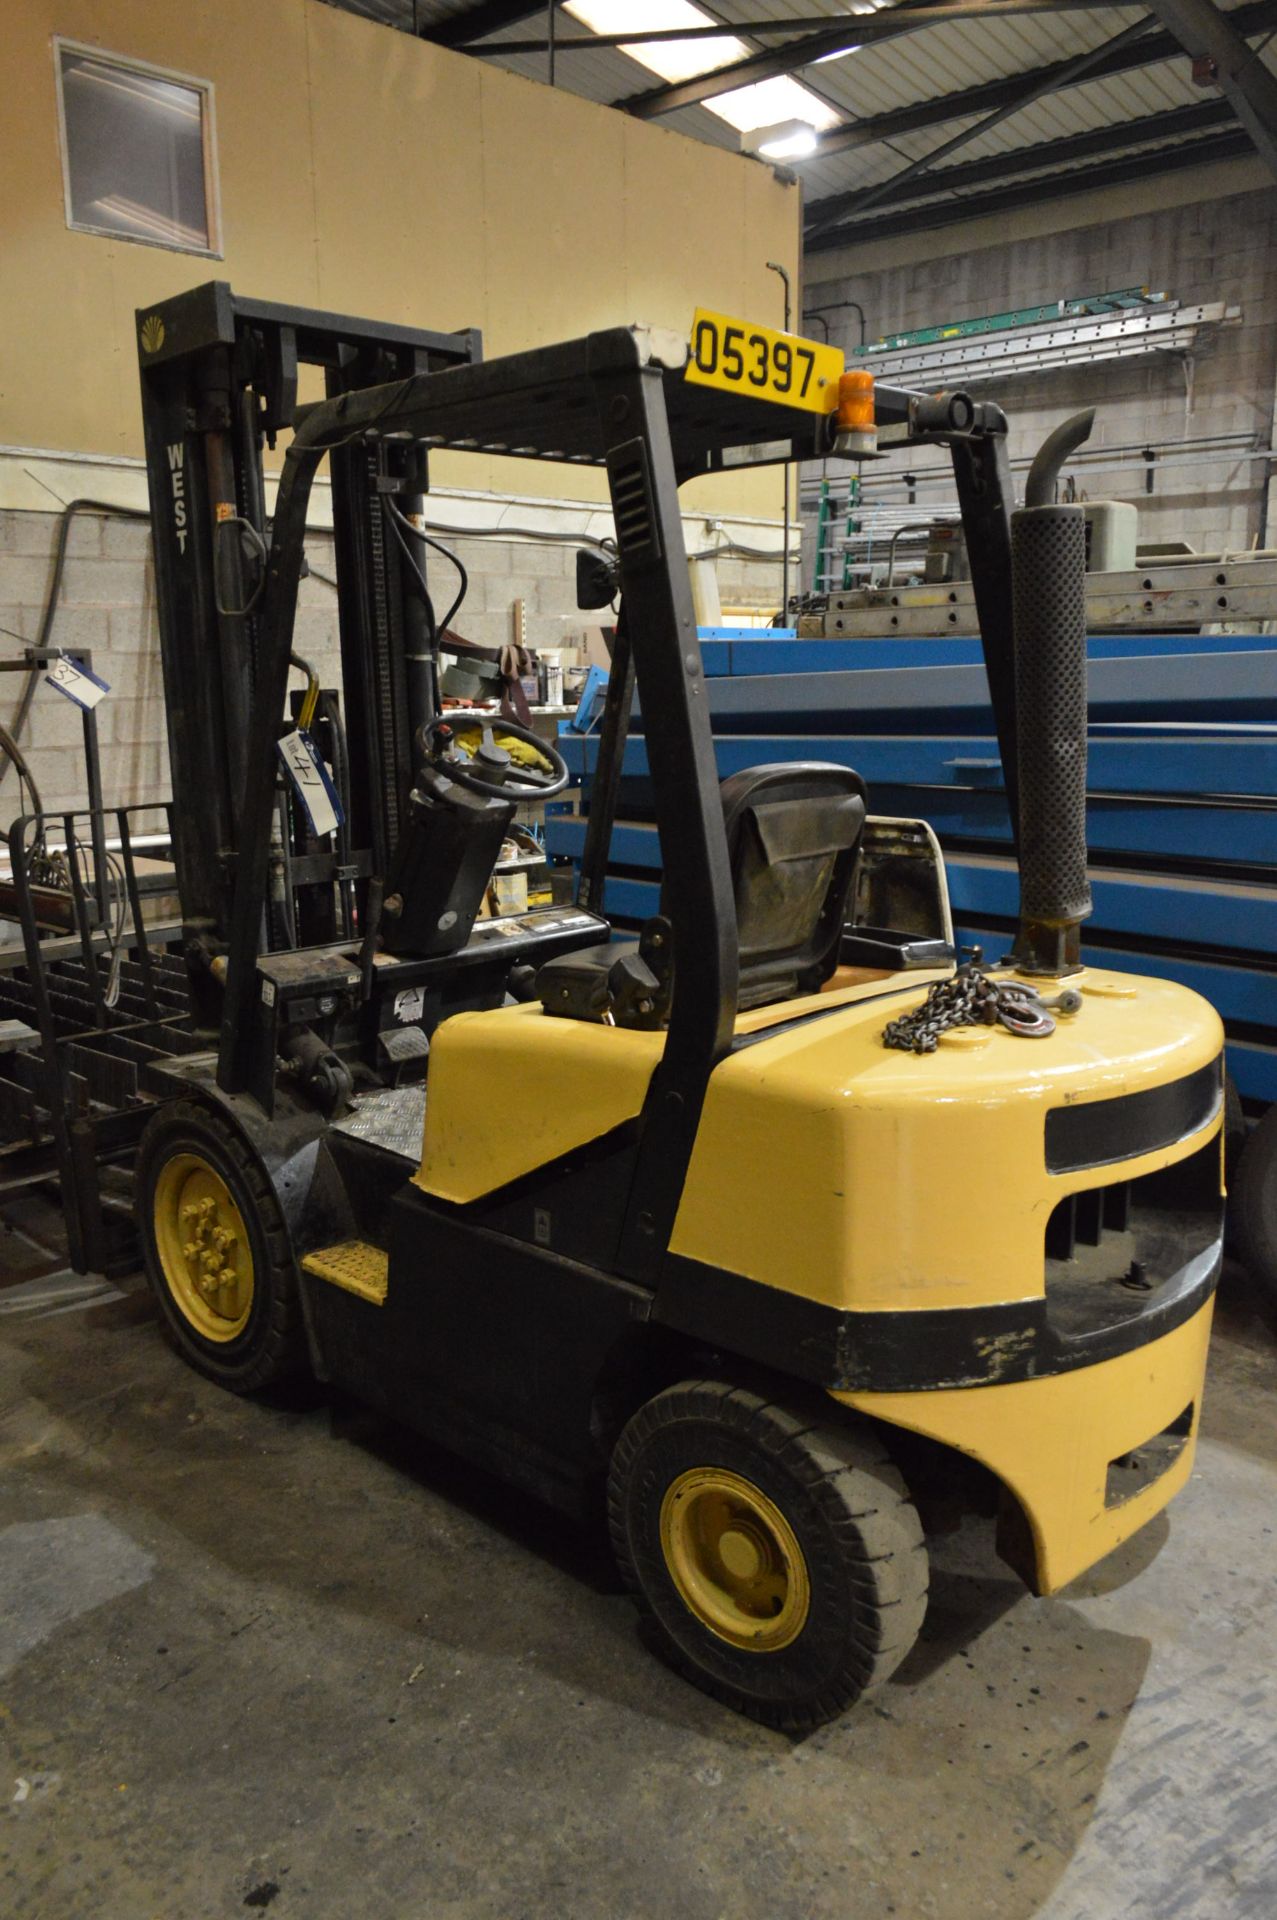 Daewoo D25S-3 2500kg cap. DIESEL ENGINE FORK LIFT TRUCK, serial no. FK-00211, indicated hours at - Image 2 of 8